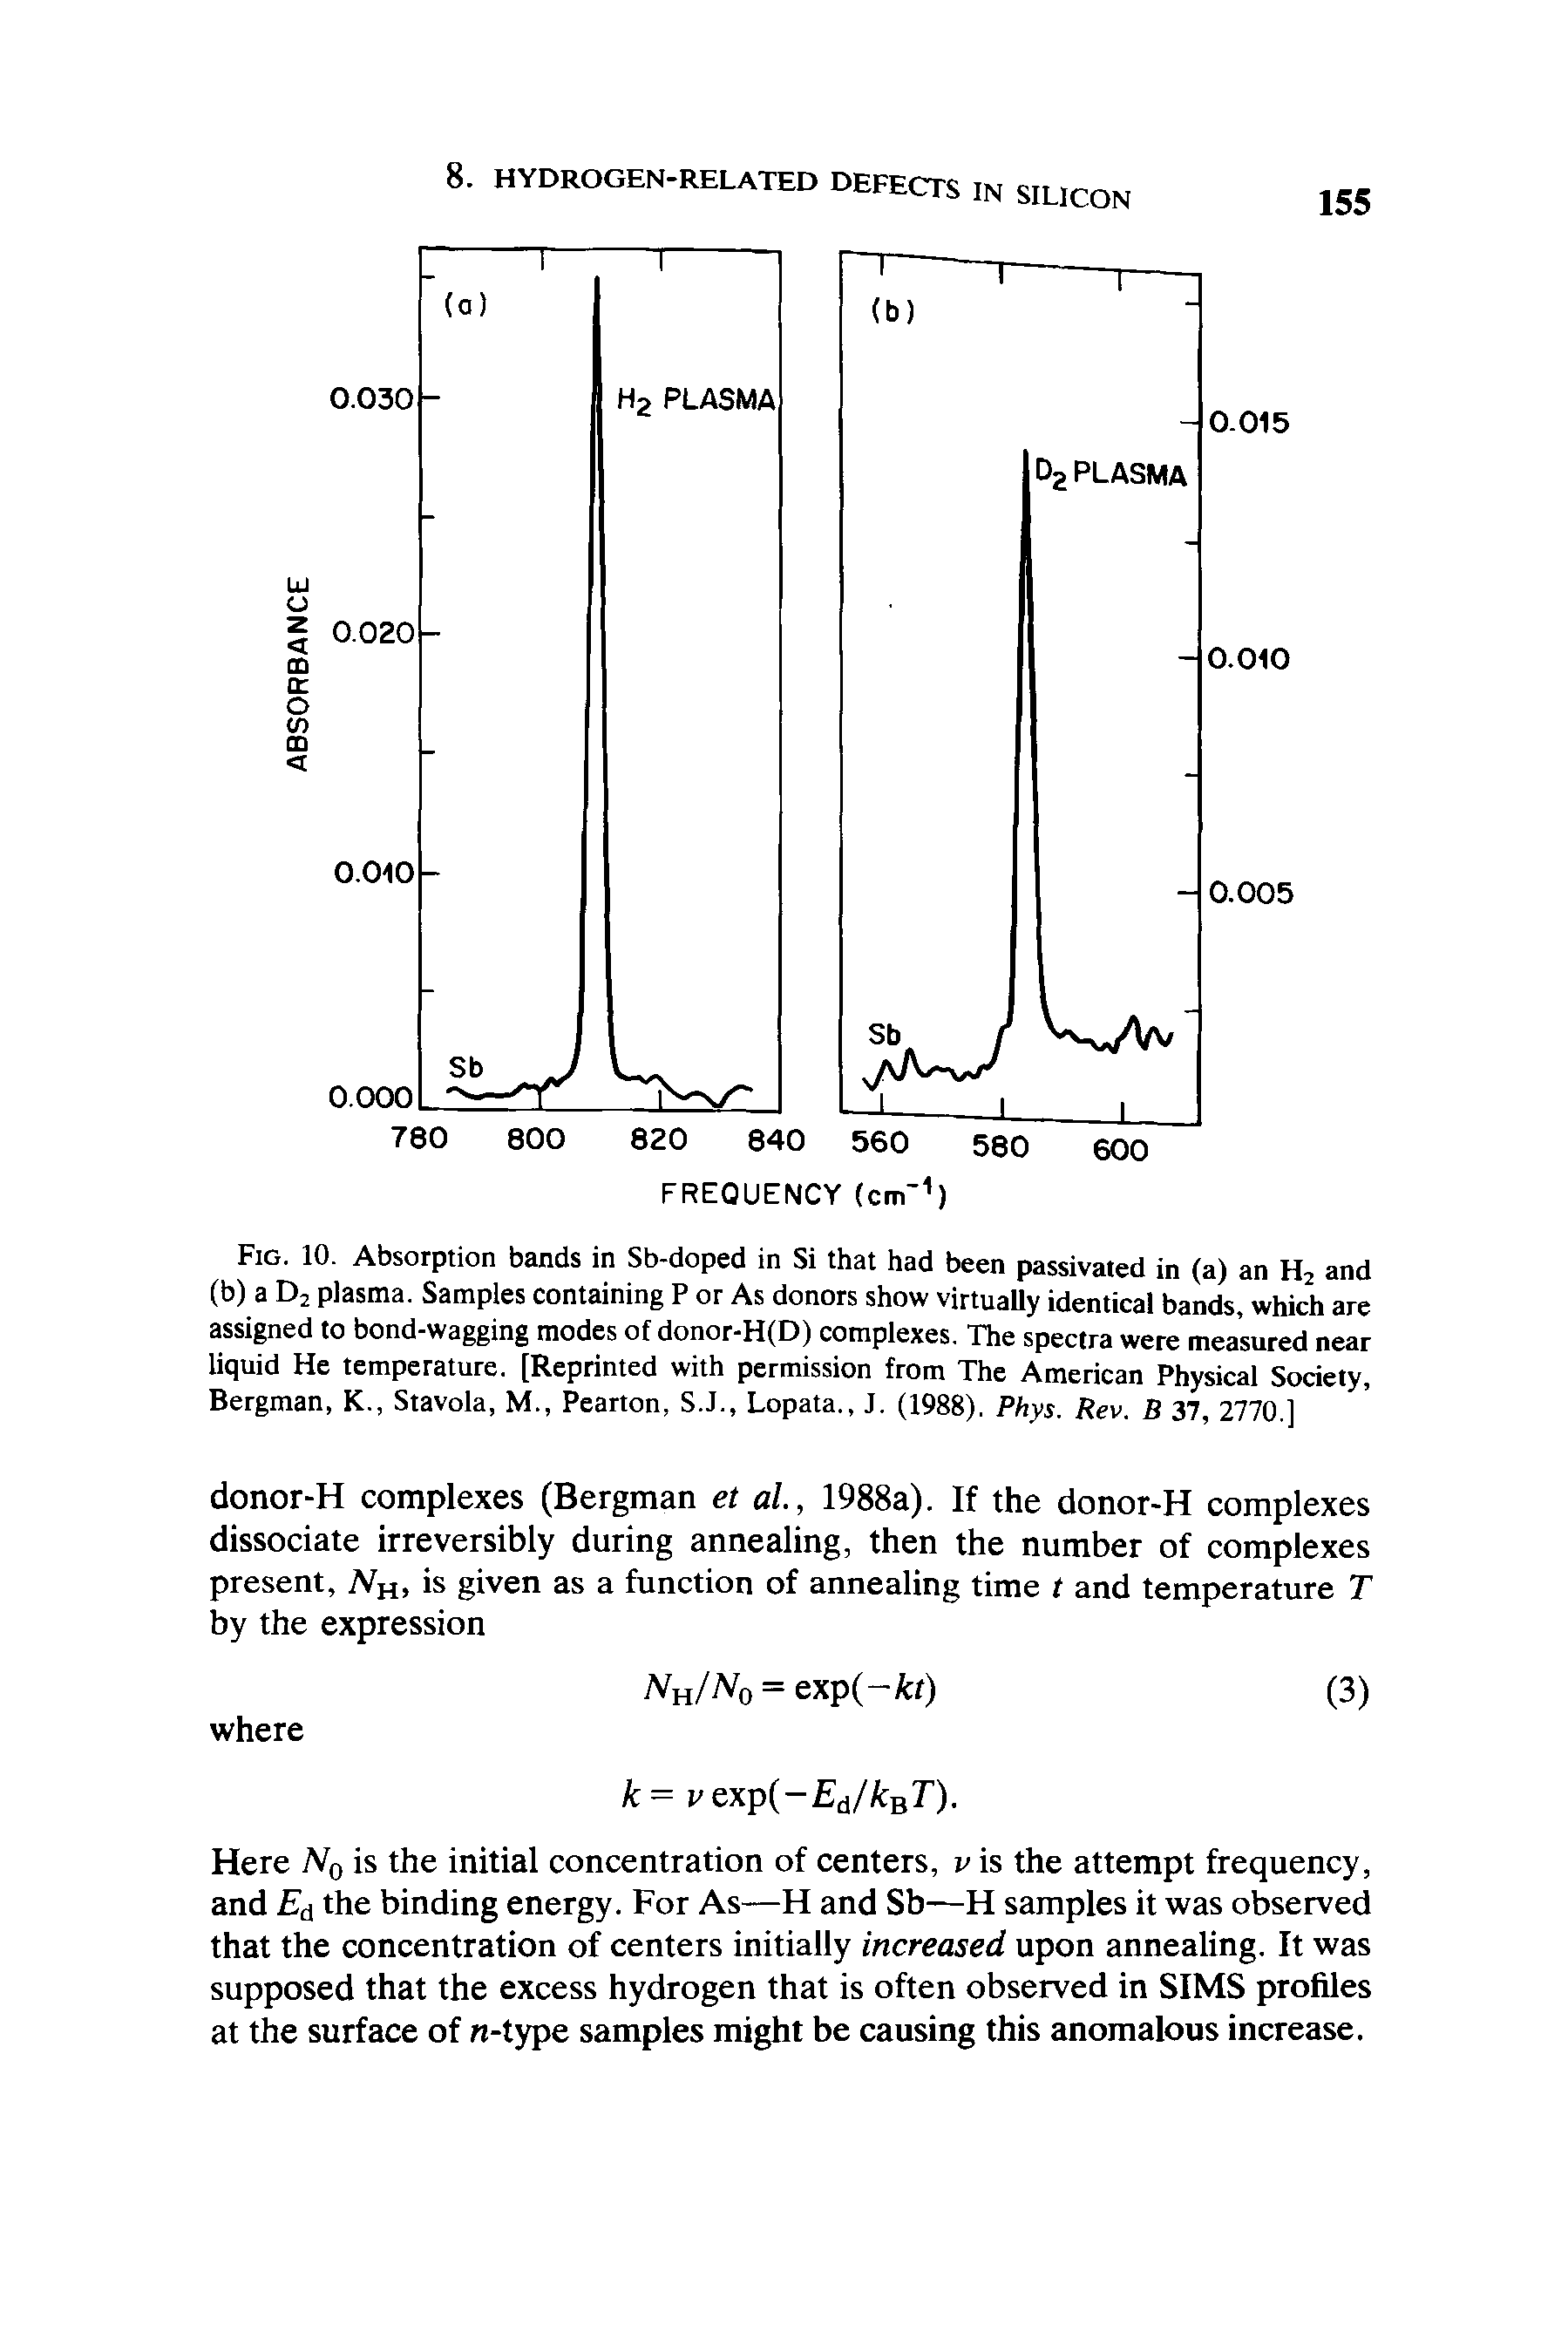 Fig. 10. Absorption bands in Sb-doped in Si that had been passivated in (a) an H2 and (b) a D2 plasma. Samples containing P or As donors show virtually identical bands, which are assigned to bond-wagging modes of donor-H(D) complexes. The spectra were measured near liquid He temperature. [Reprinted with permission from The American Physical Society, Bergman, K., Stavola, M., Pearton, S.J., Lopata., J. (1988). Phys. Rev. B 37, 2770 ]...